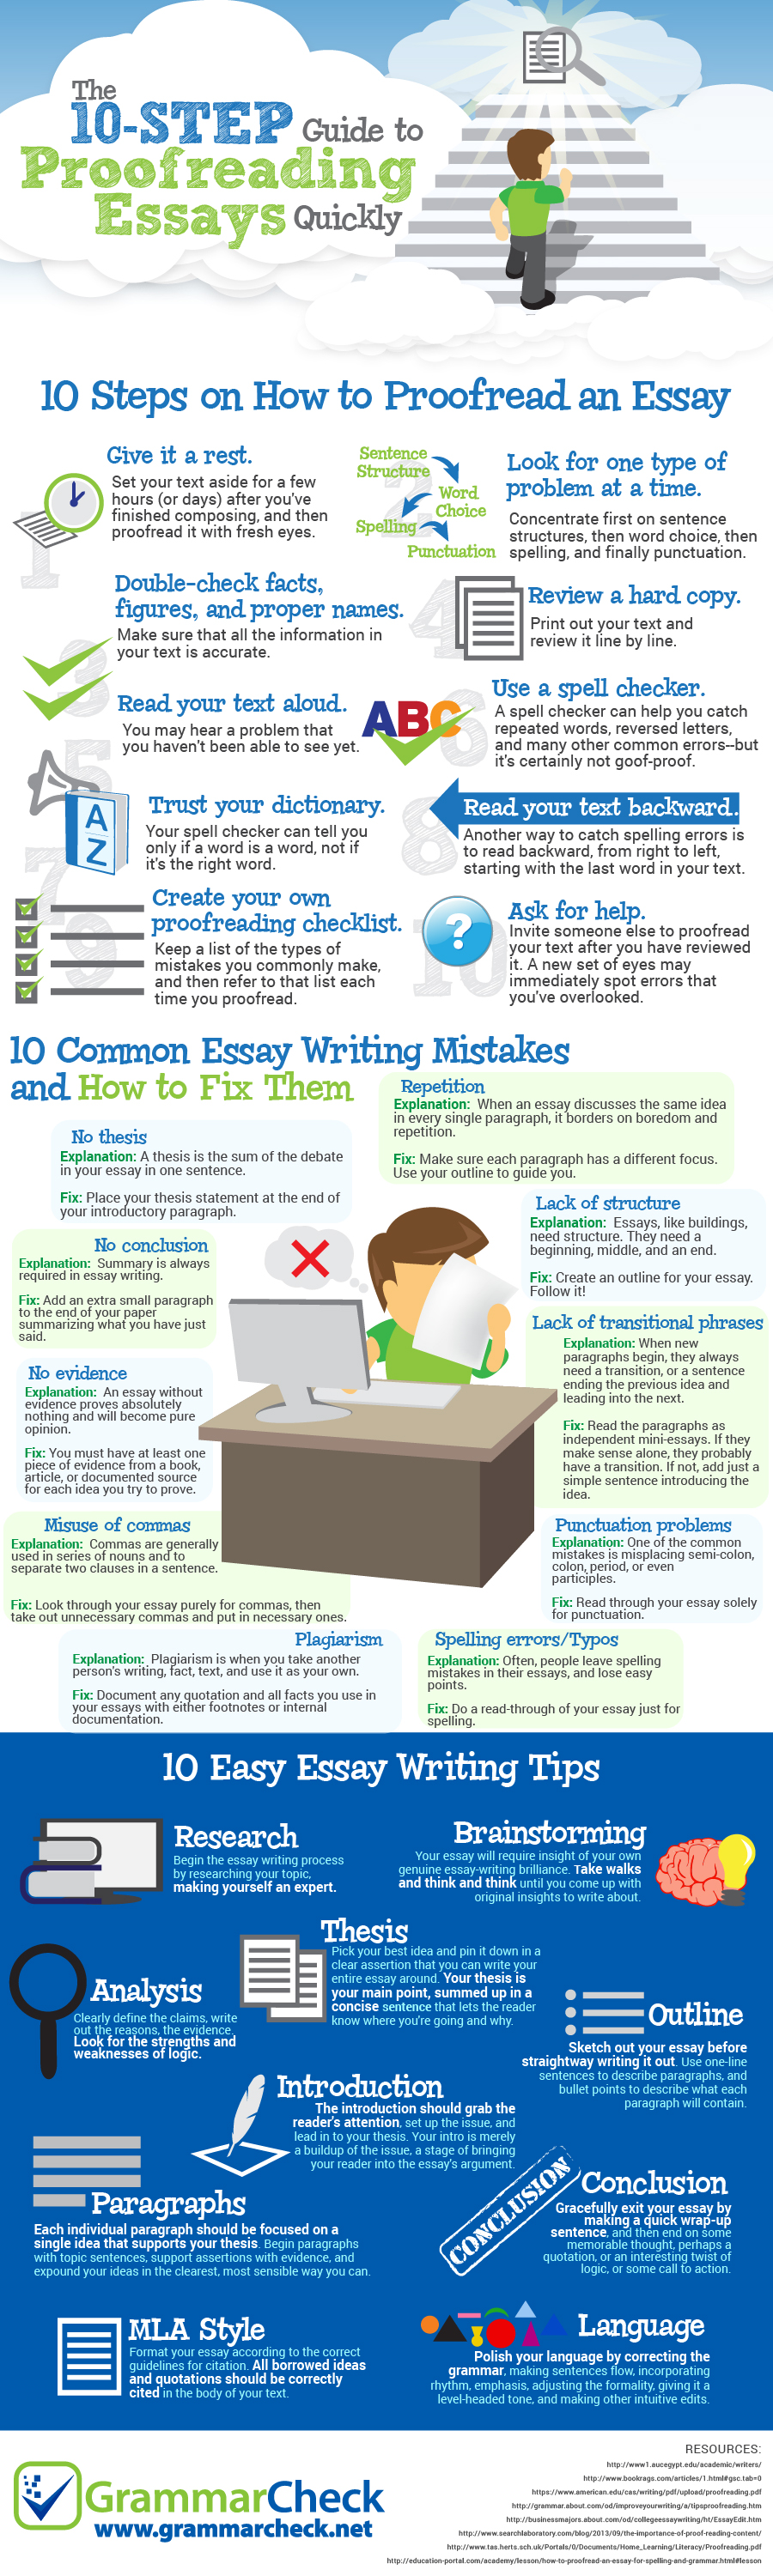 The 10-Step Guide to Proofreading Essays Quickly (Infographic)